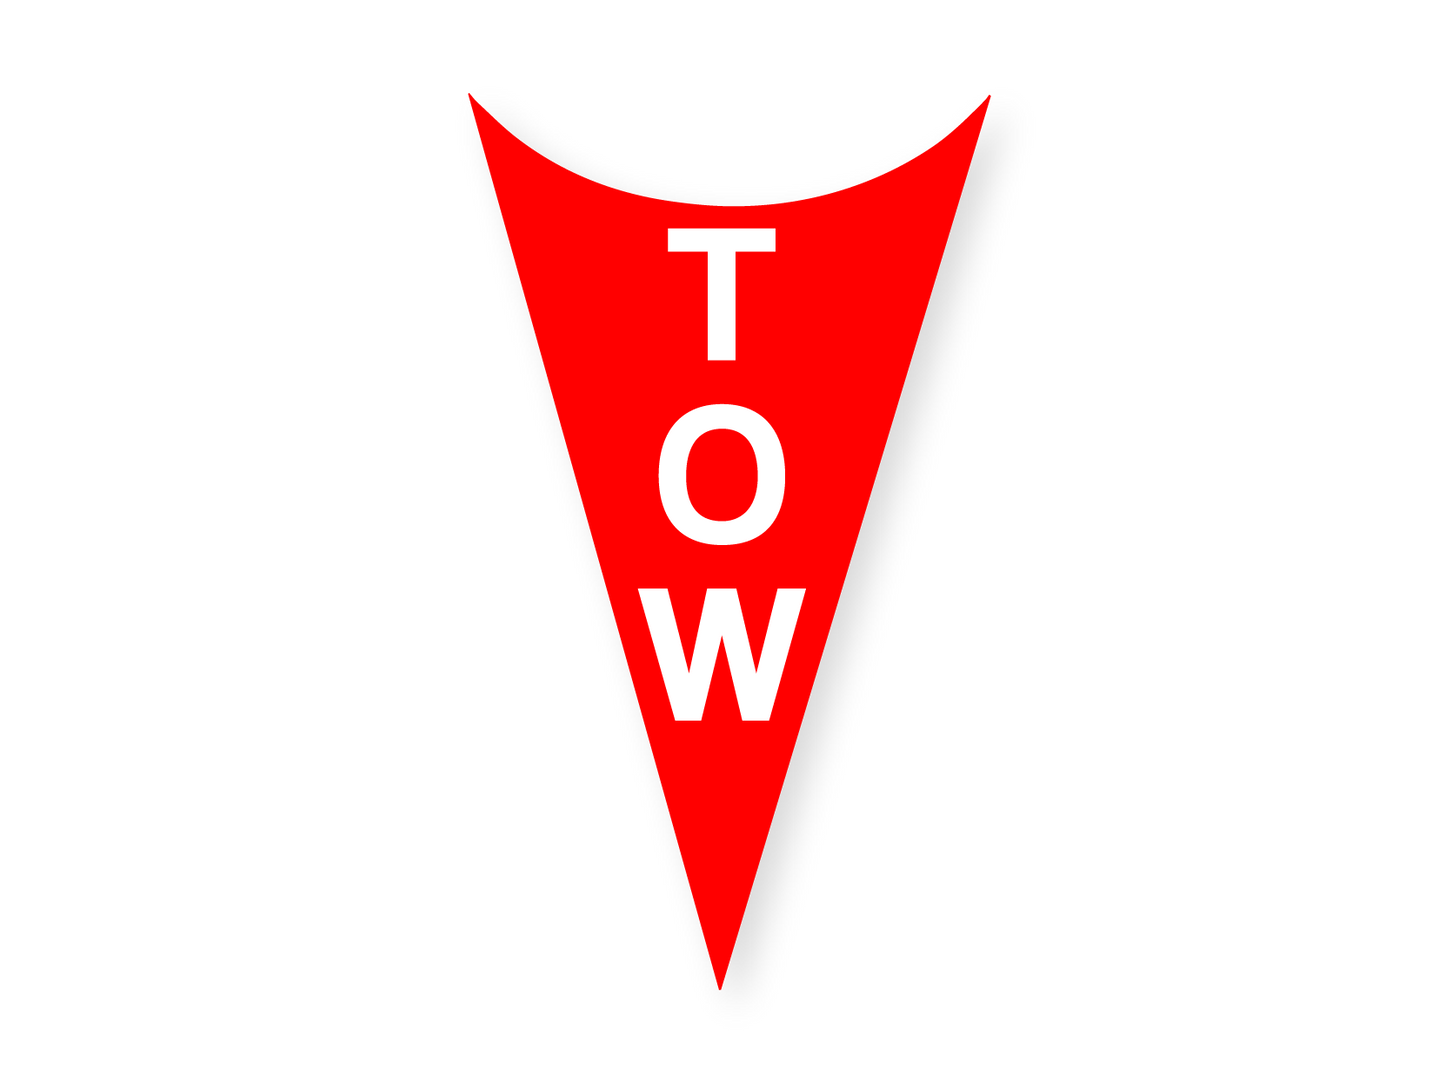 TOW DECAL